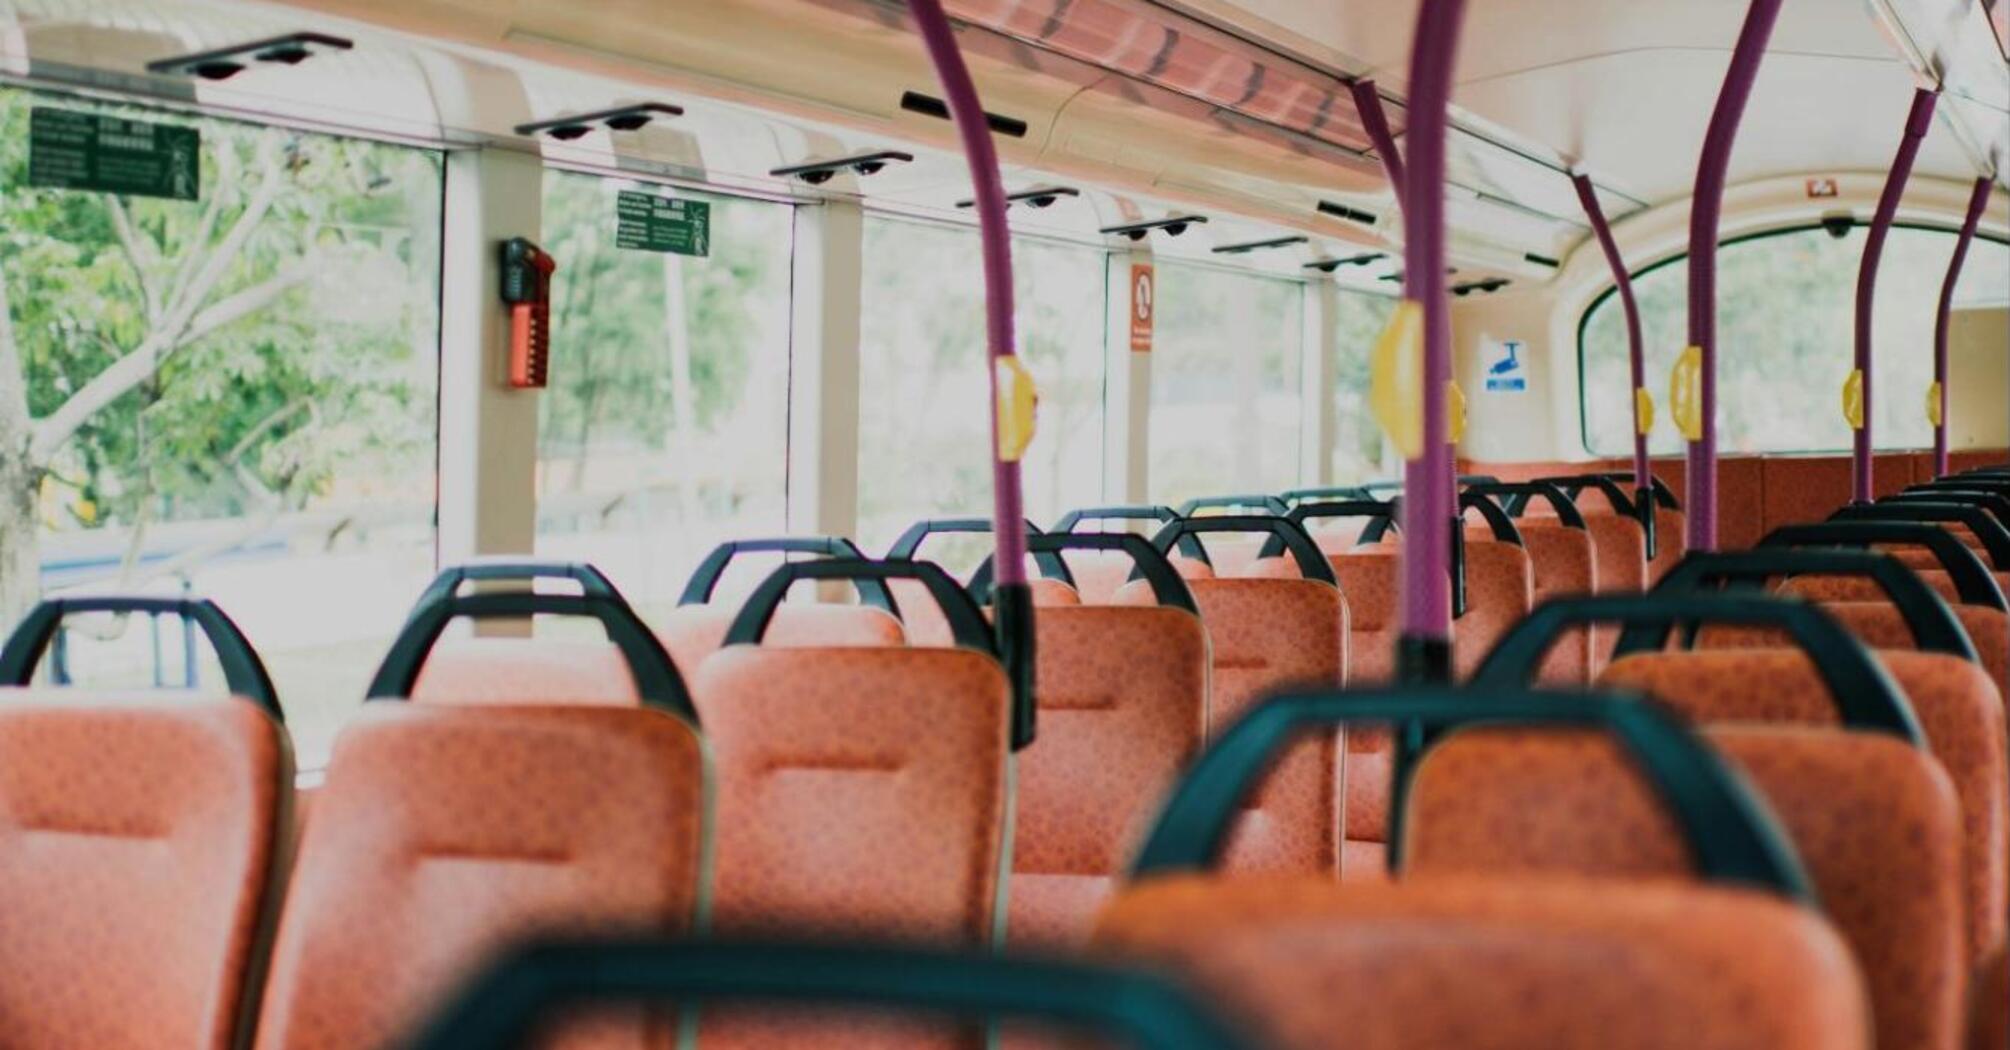 Interior of an empty bus with orange seats and purple handrails